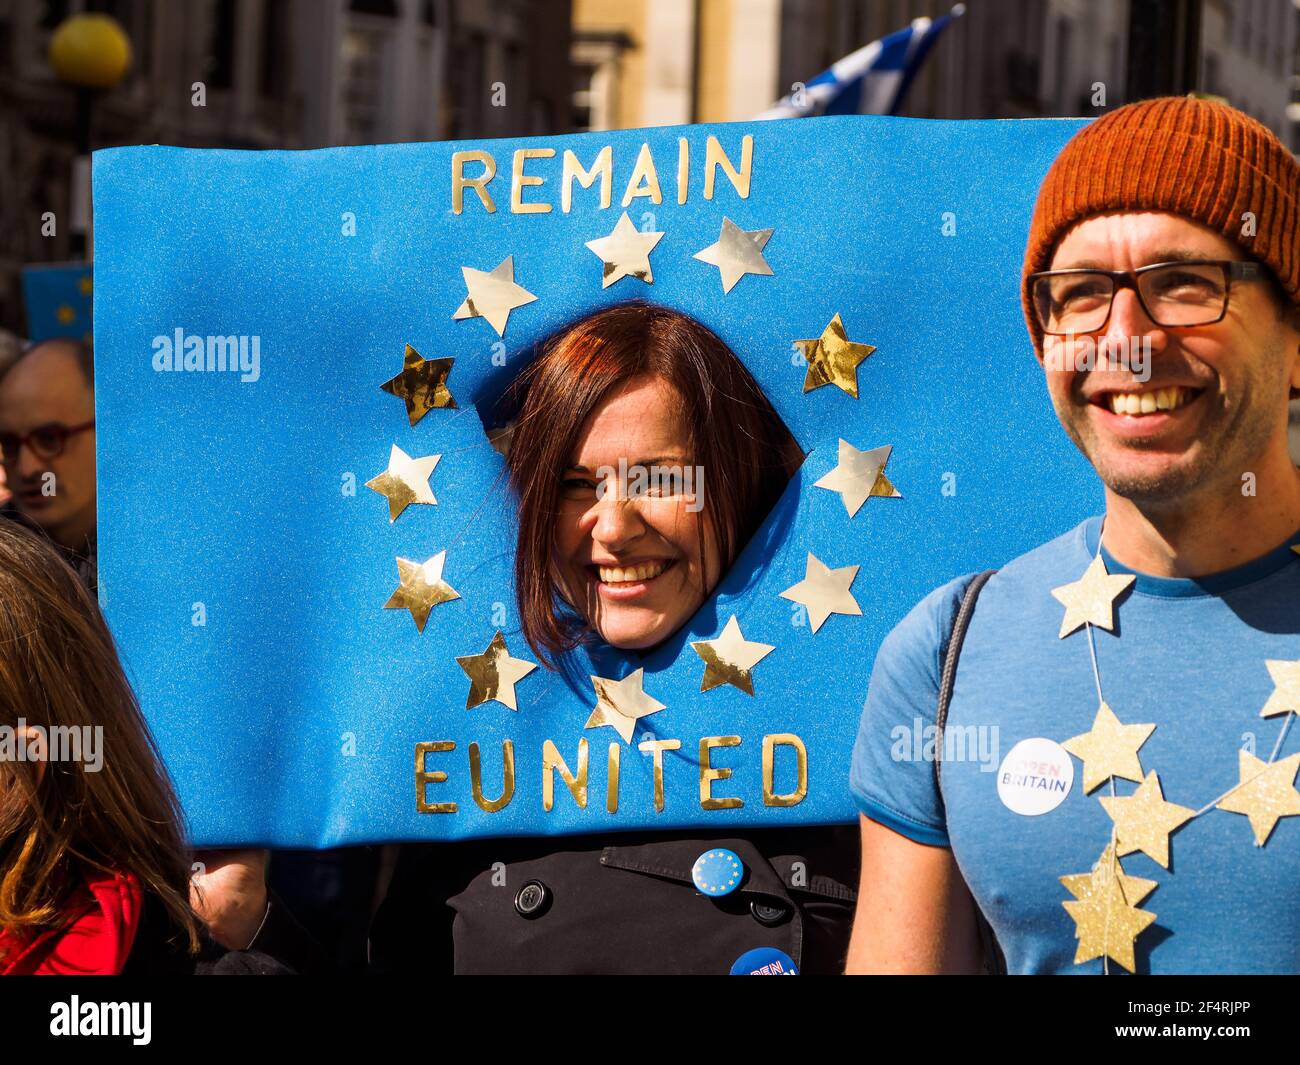 25th March 2017 Rally pro European Union against Brexit - London, England Stock Photo